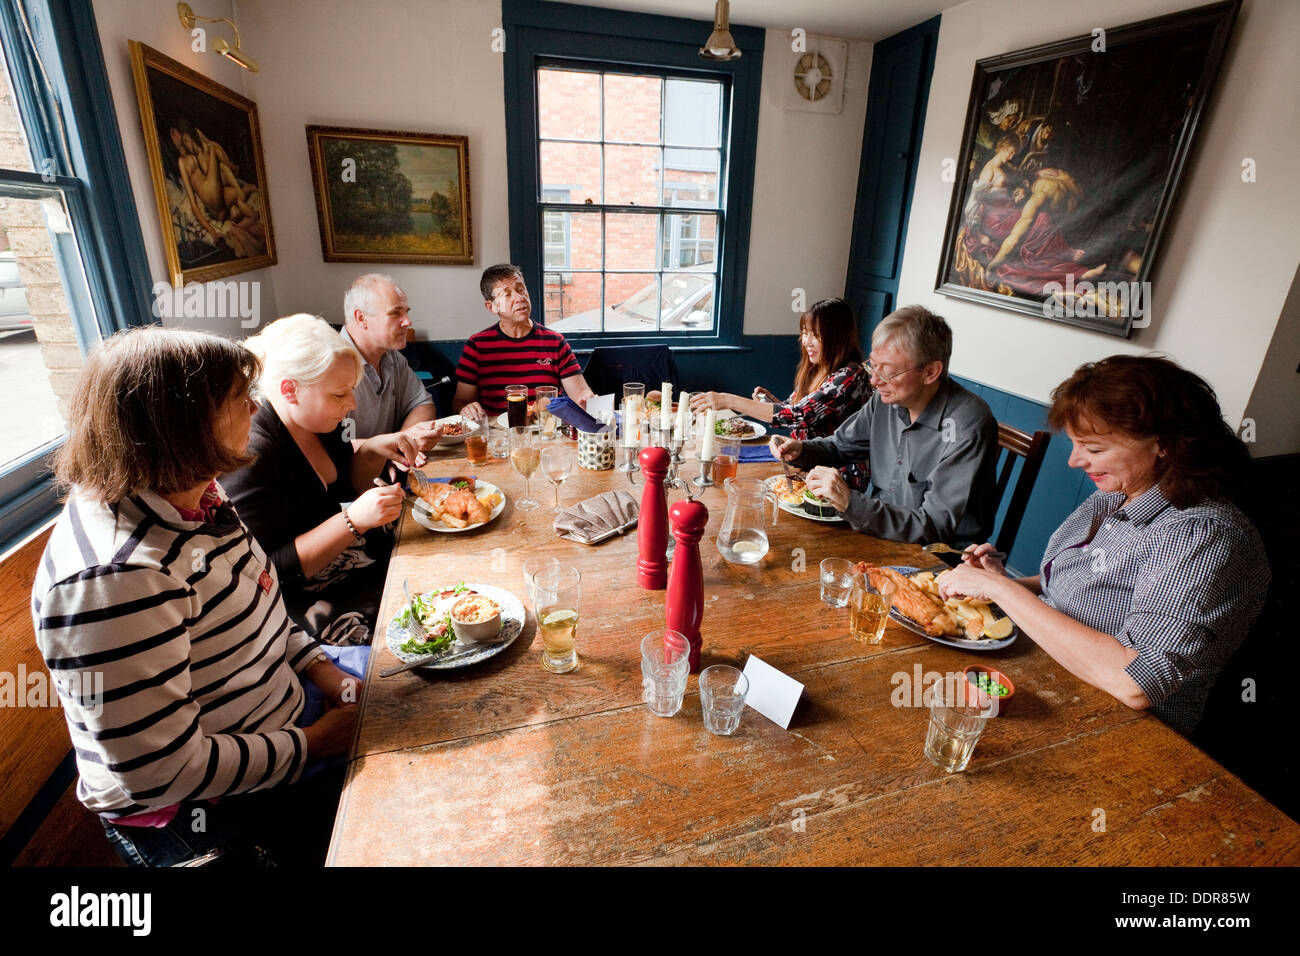 A group of people eating a pub lunch, The Punter Pub Inn, South St, Oxford, Oxfordshire UK Stock Photo